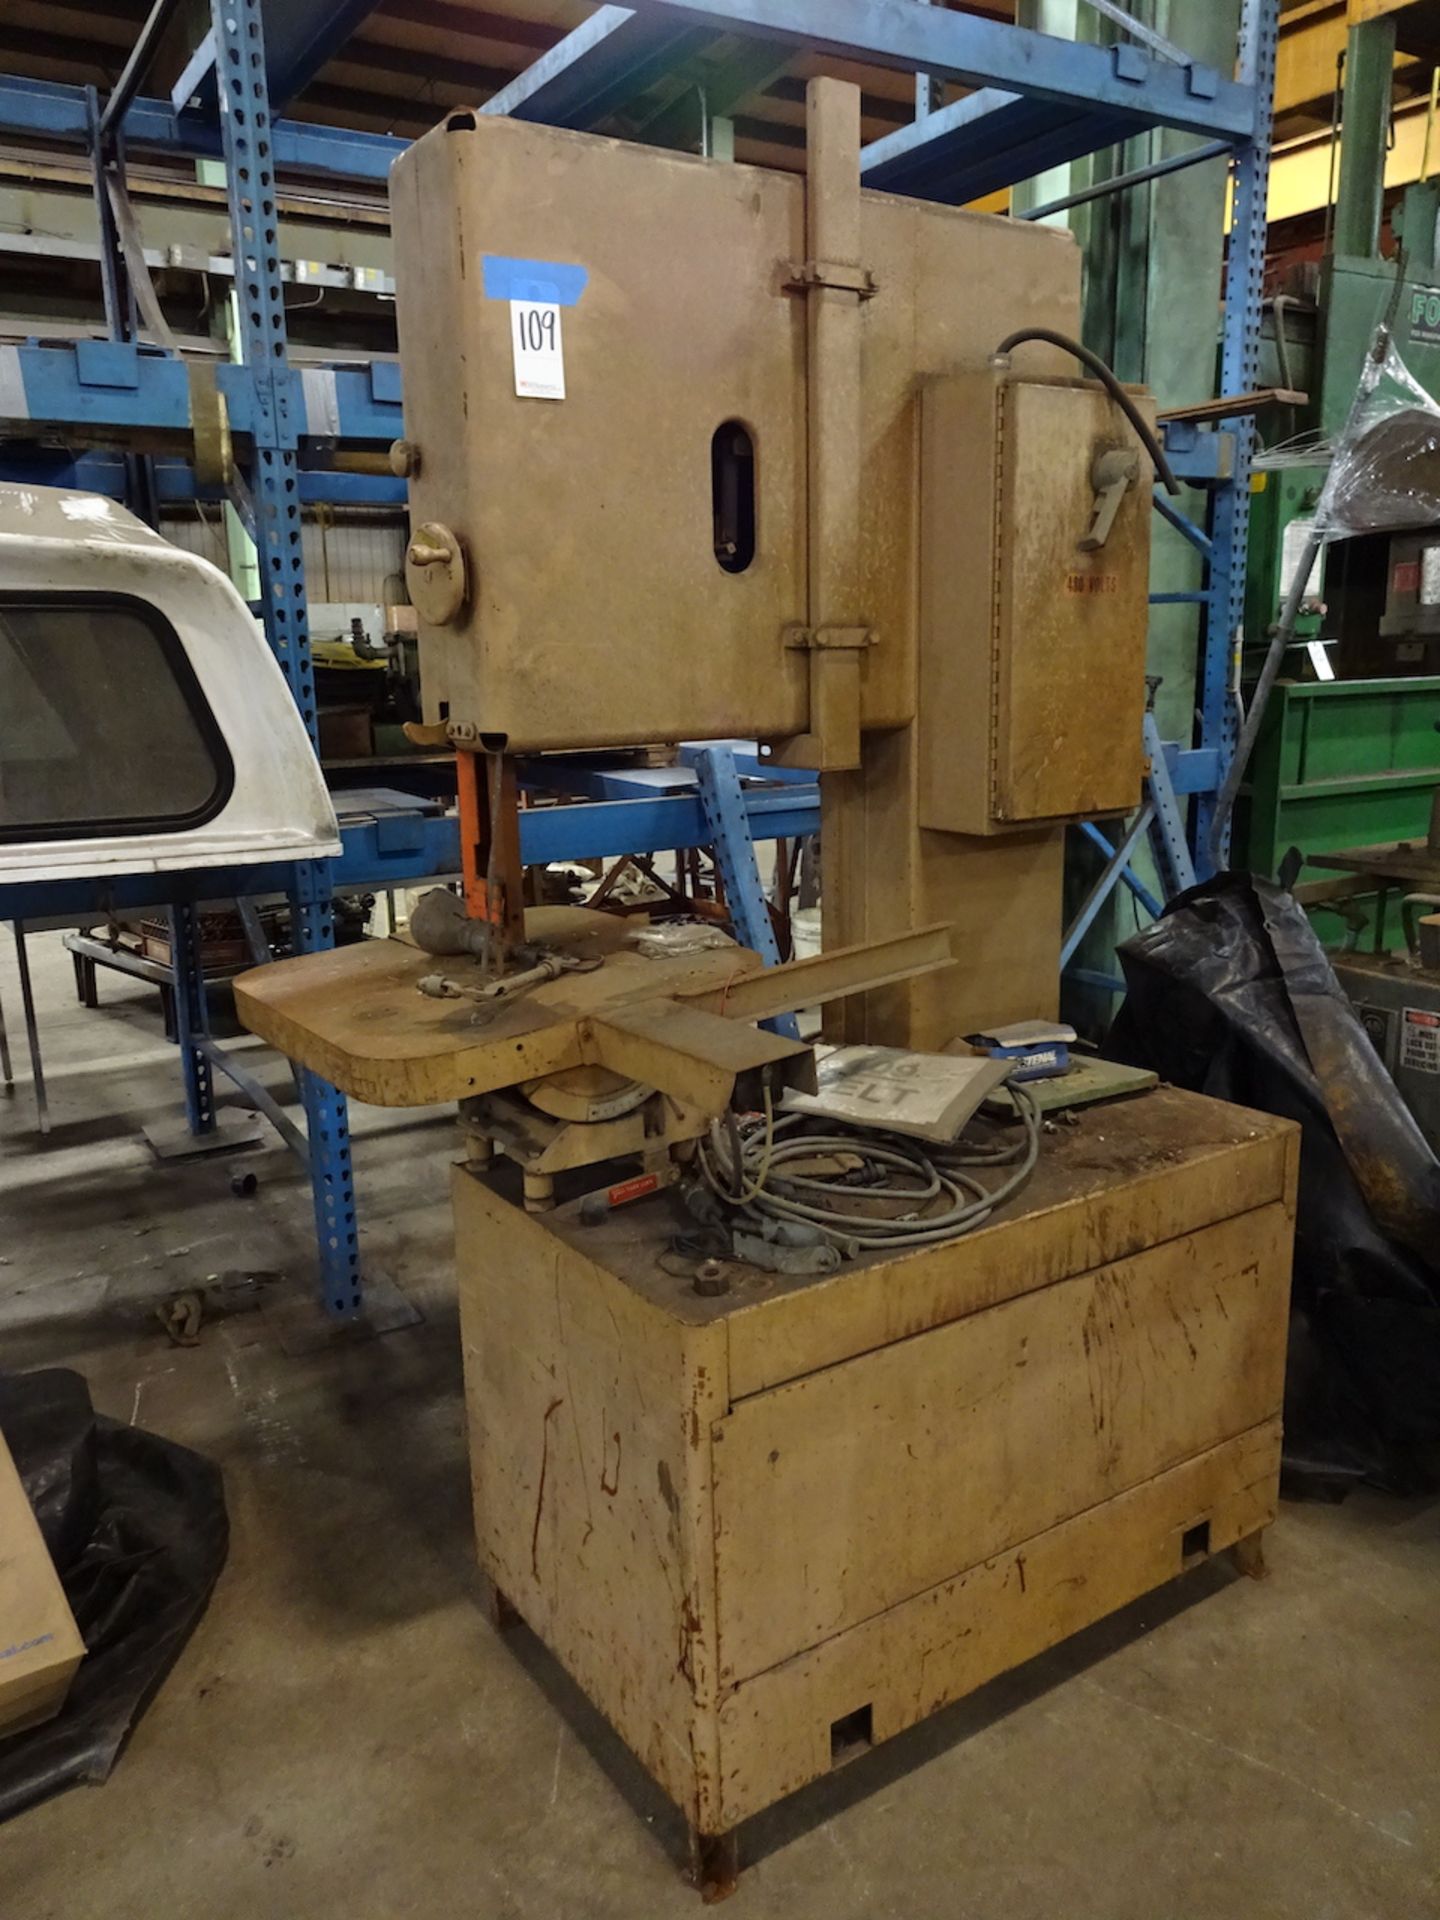 Grob 24 in. Type 4V-24 Vertical Band Saw, S/N 1287 (1977)